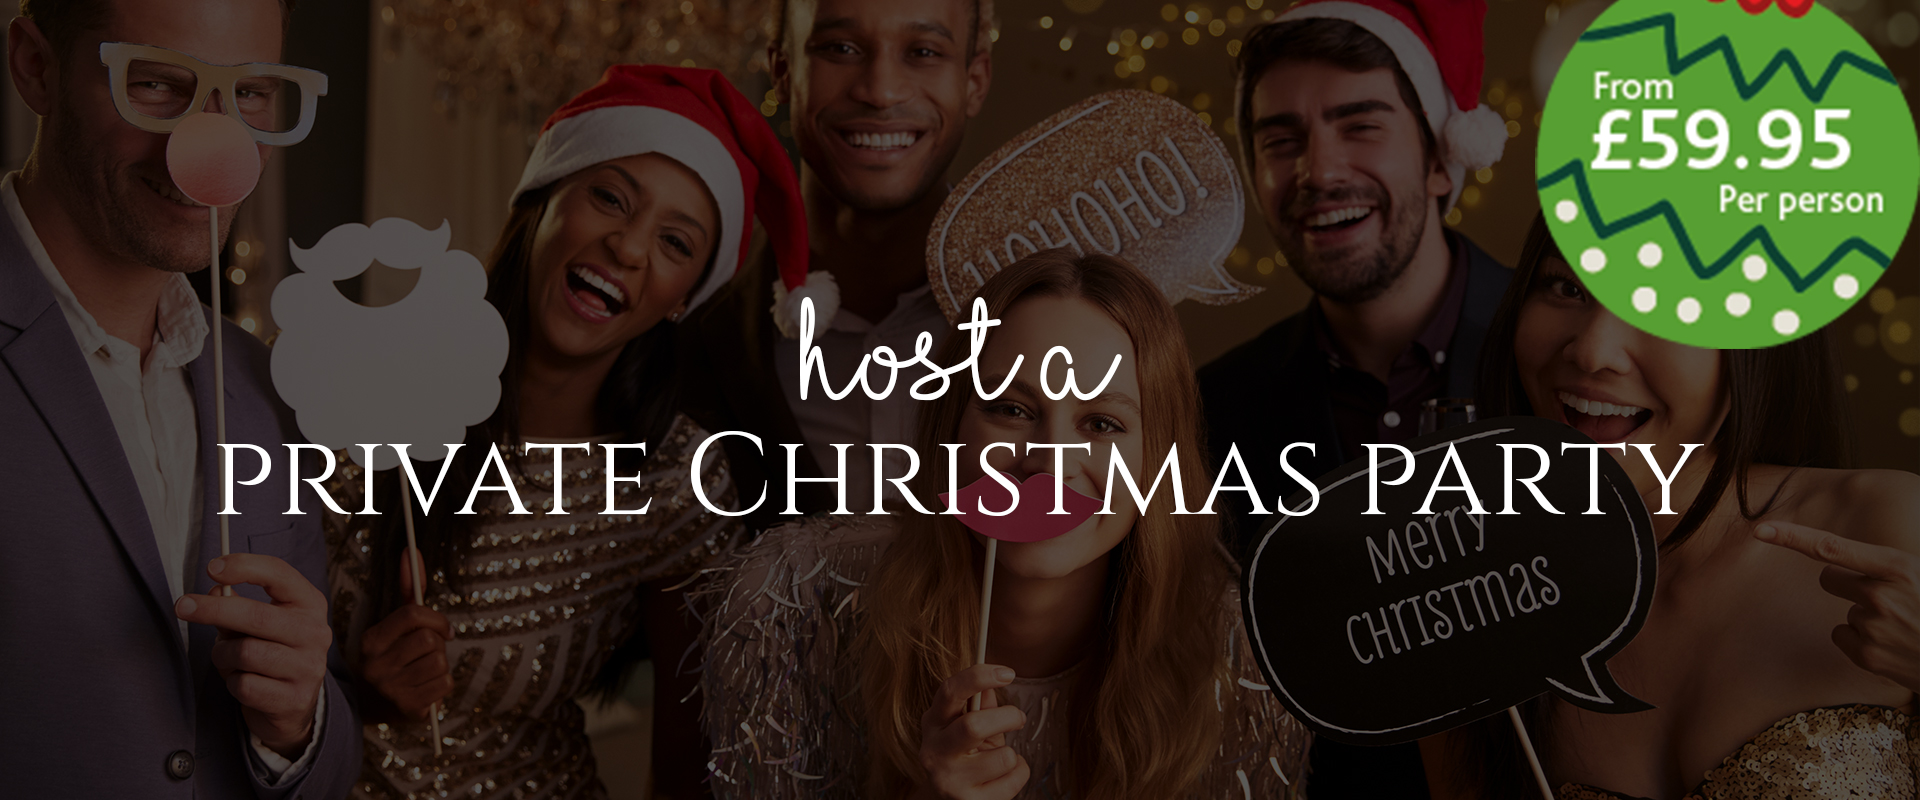 Private-Christmas-Party-Nights-From-£59.95-per-person